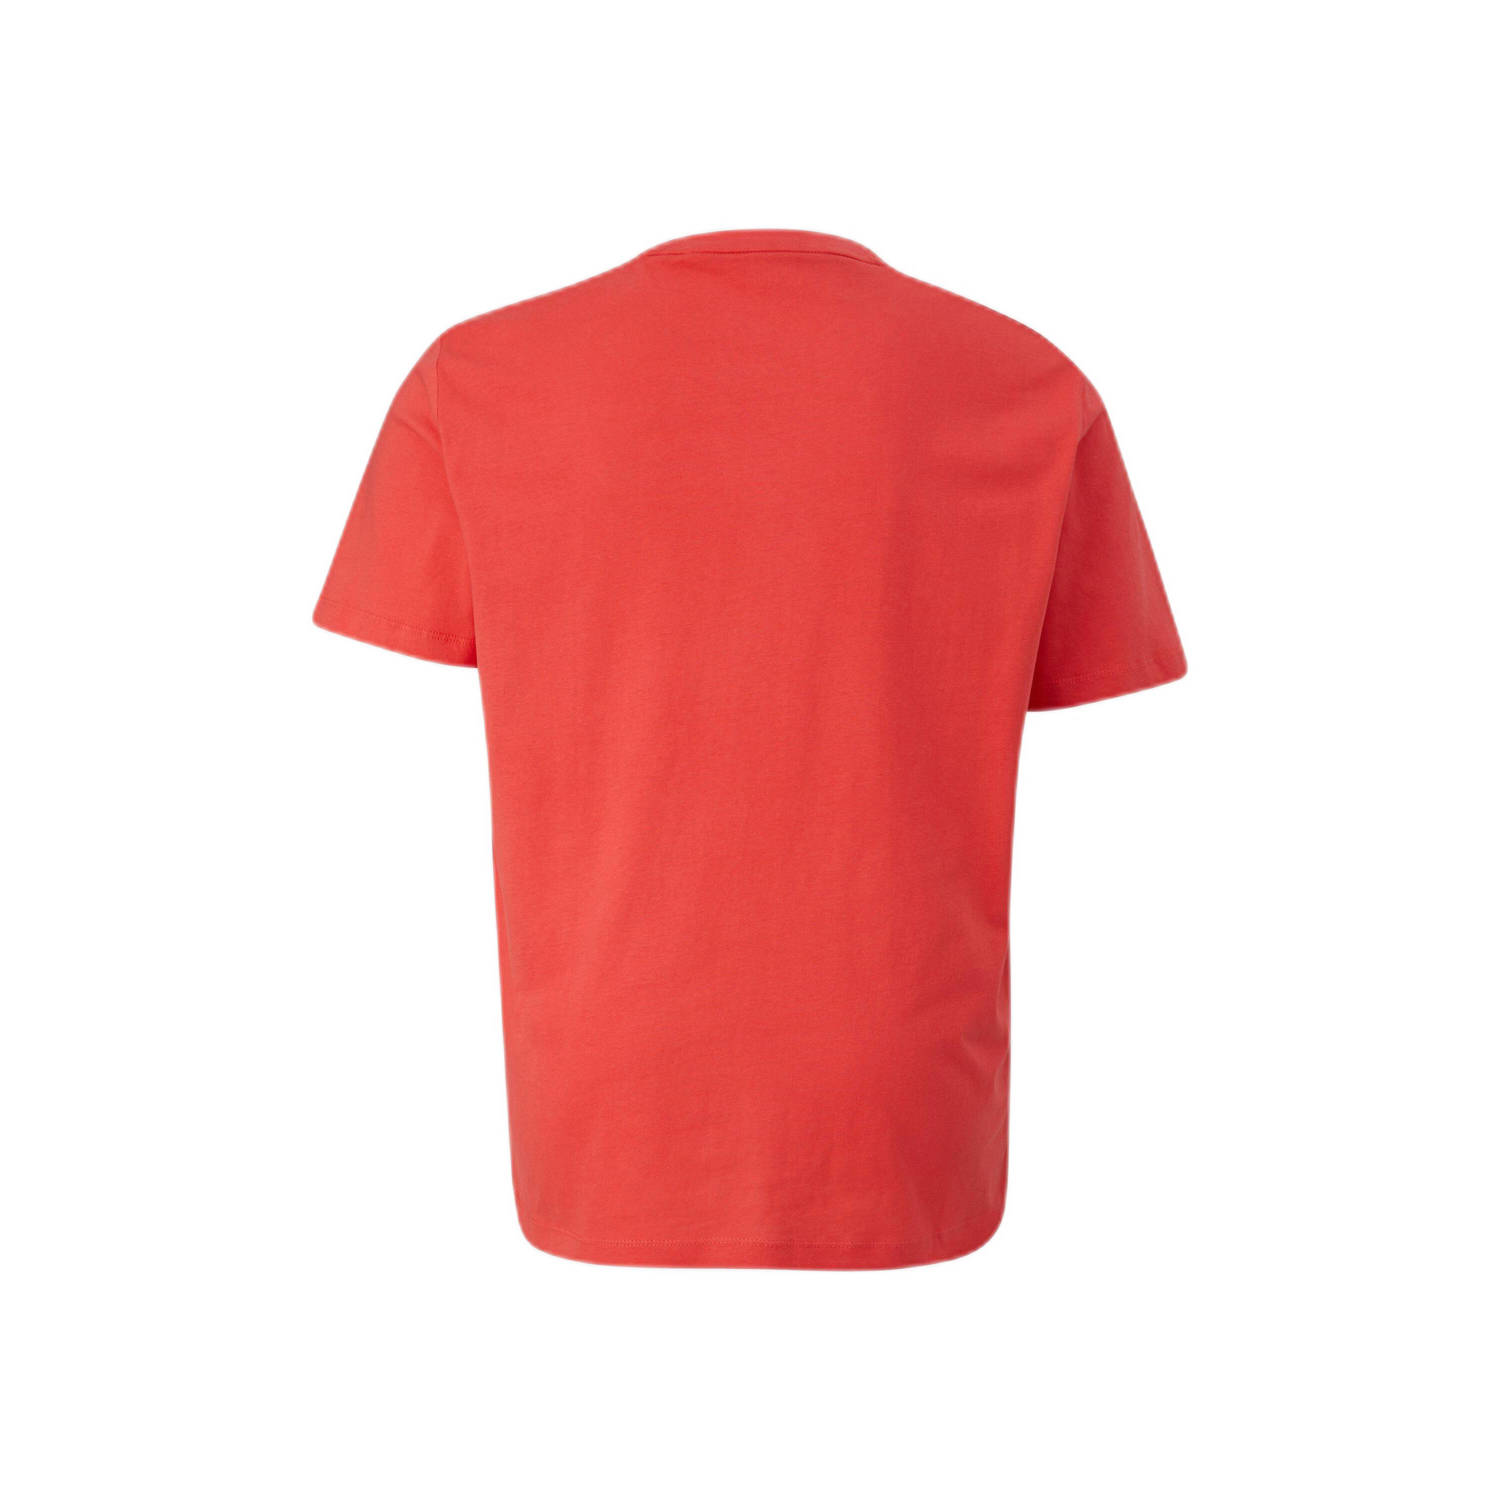 s.Oliver Big Size T-shirt Plus Size rood